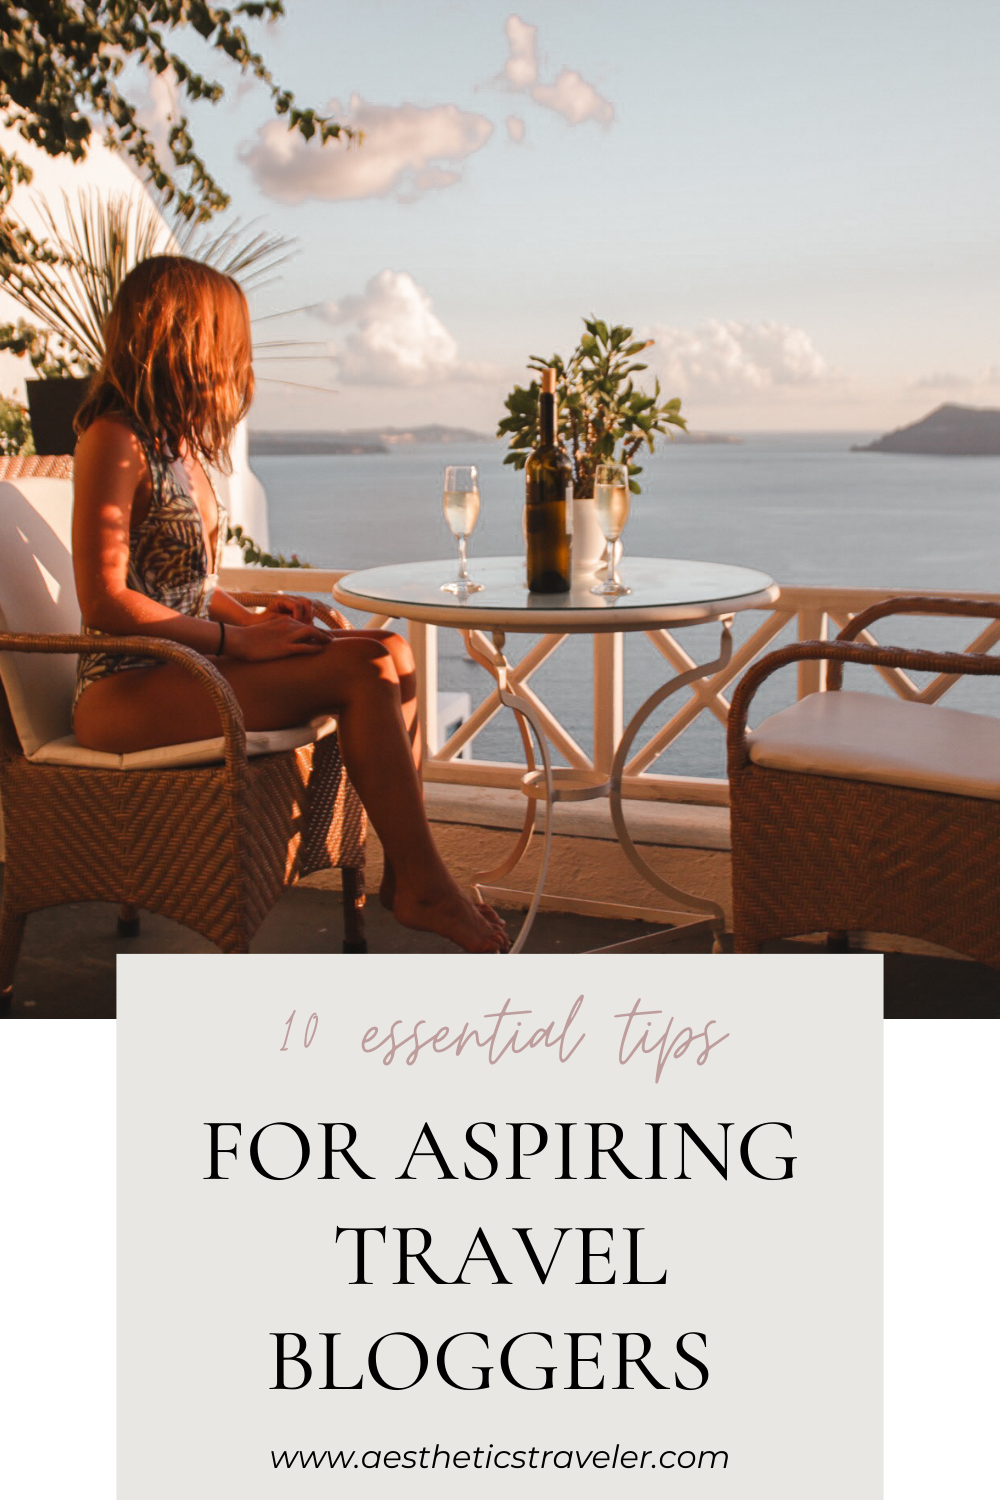 10 Essential Tips for Aspiring Travel Bloggers & Creators | www.aestheticstraveler.com Your go-to resource for travel blogging tips and tricks from a 10-year travel blogger and influencer marketing professional IG: @aestheticstraveler_